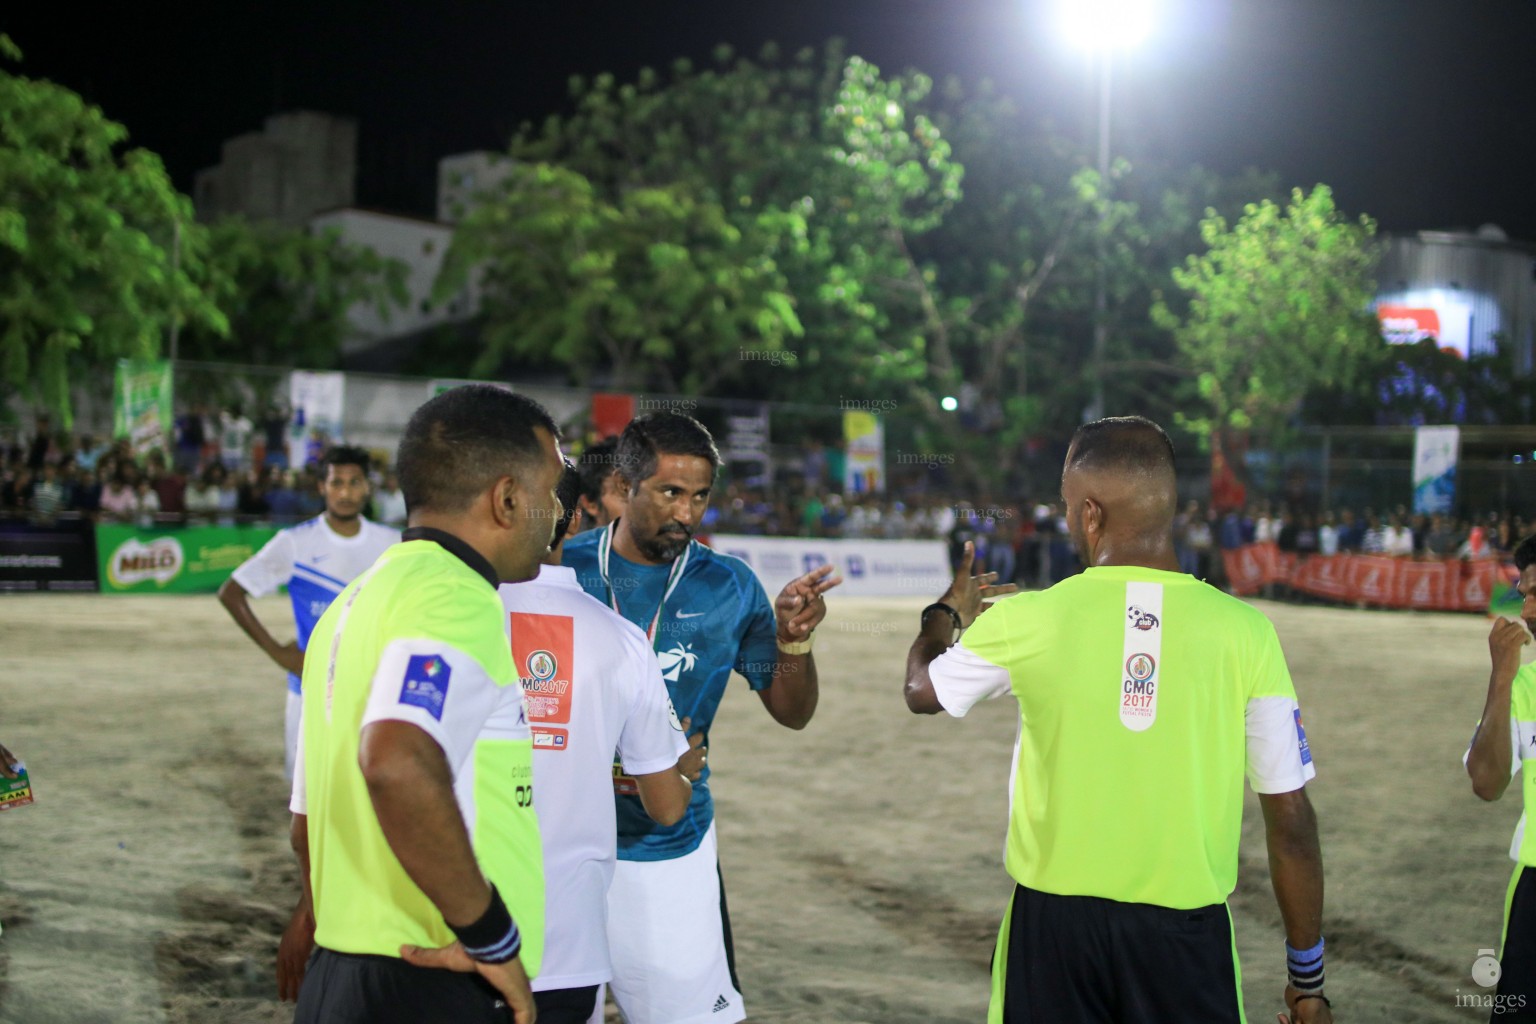 Opening matches of Club Maldives Cup 2017 and 18/30 Womens Futsal Fiesta in Male', Maldives, Saturday, April 8, 2017.(Images.mv Photo/ Hussain Sinan). 